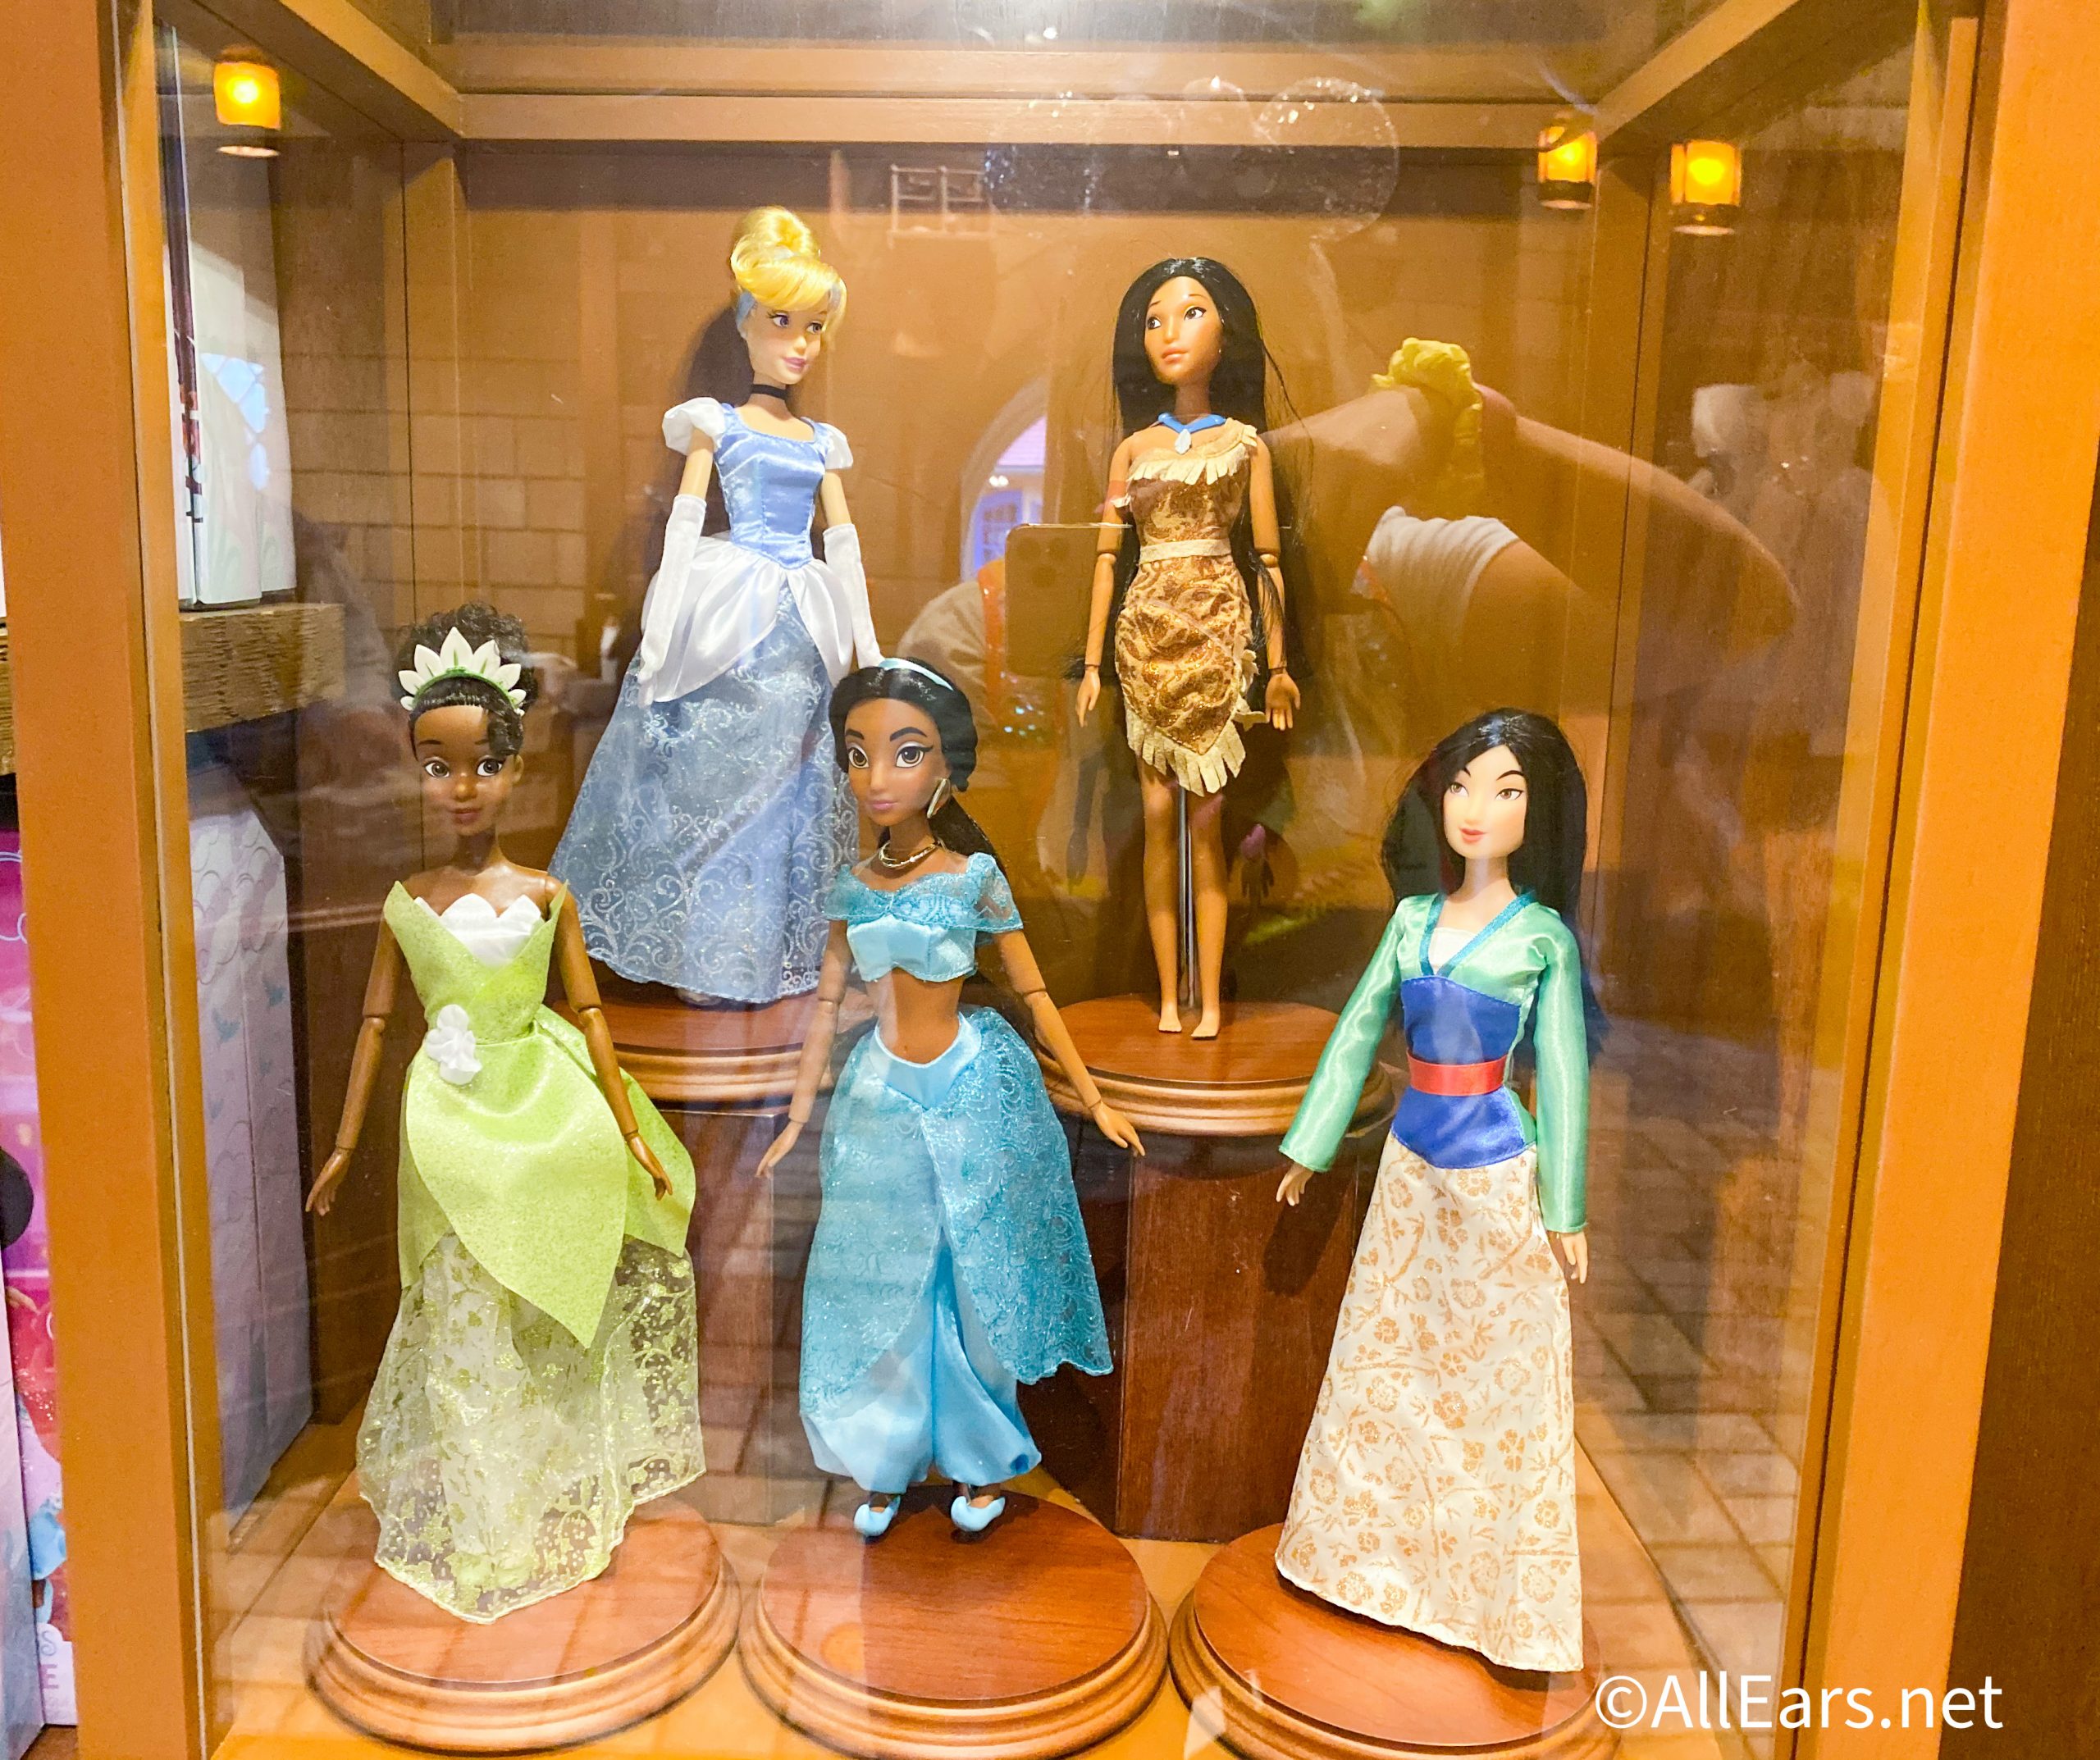 Hasbro Loses Rights to Produce Disney Princess Dolls - AllEars.Net